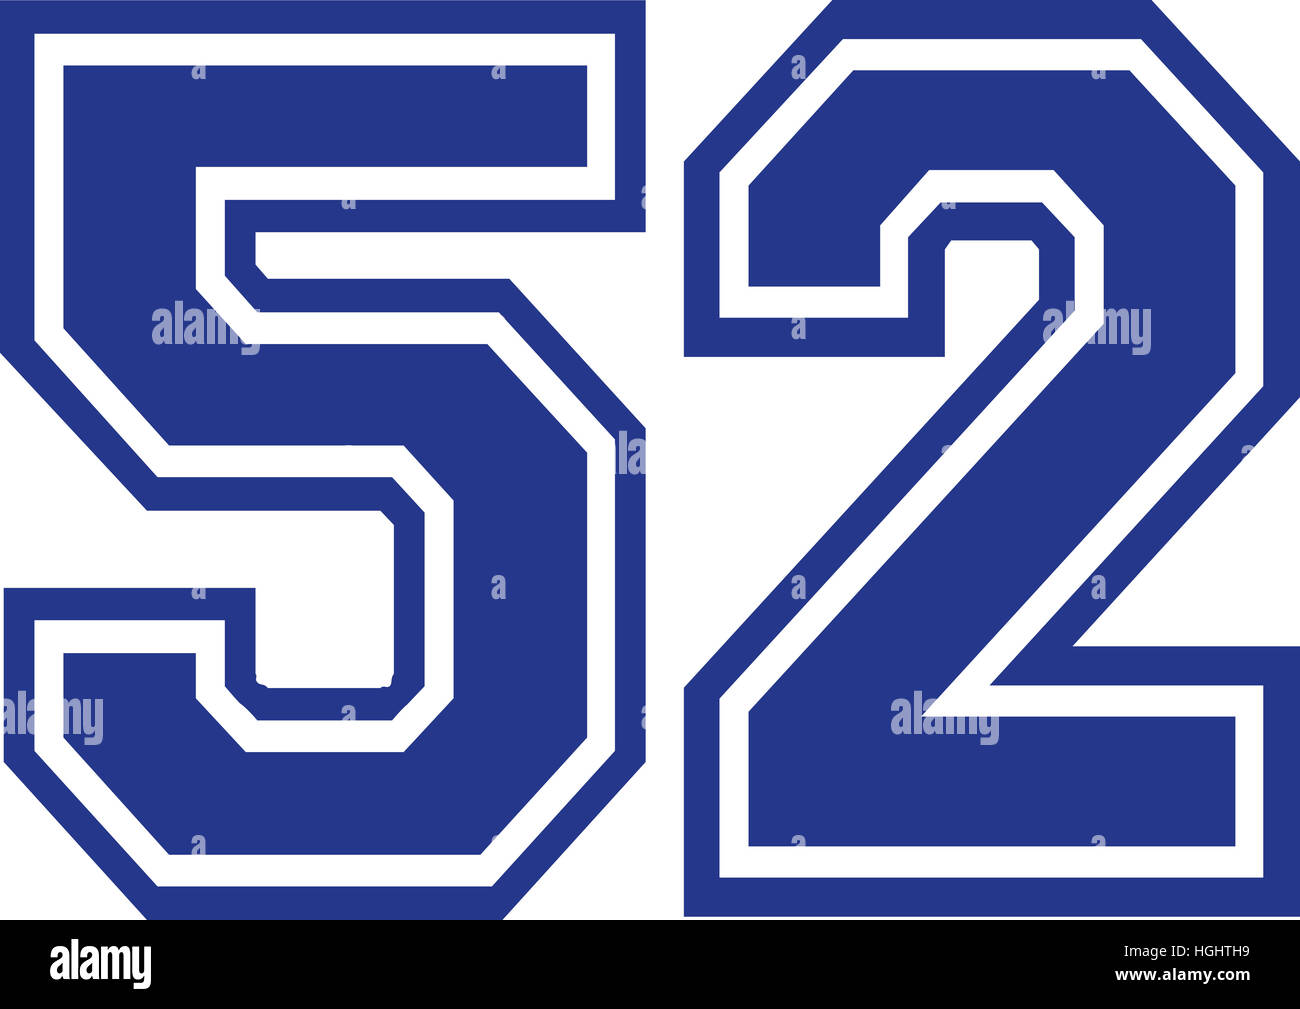 Fifty-two college number 52 Stock Photo - Alamy